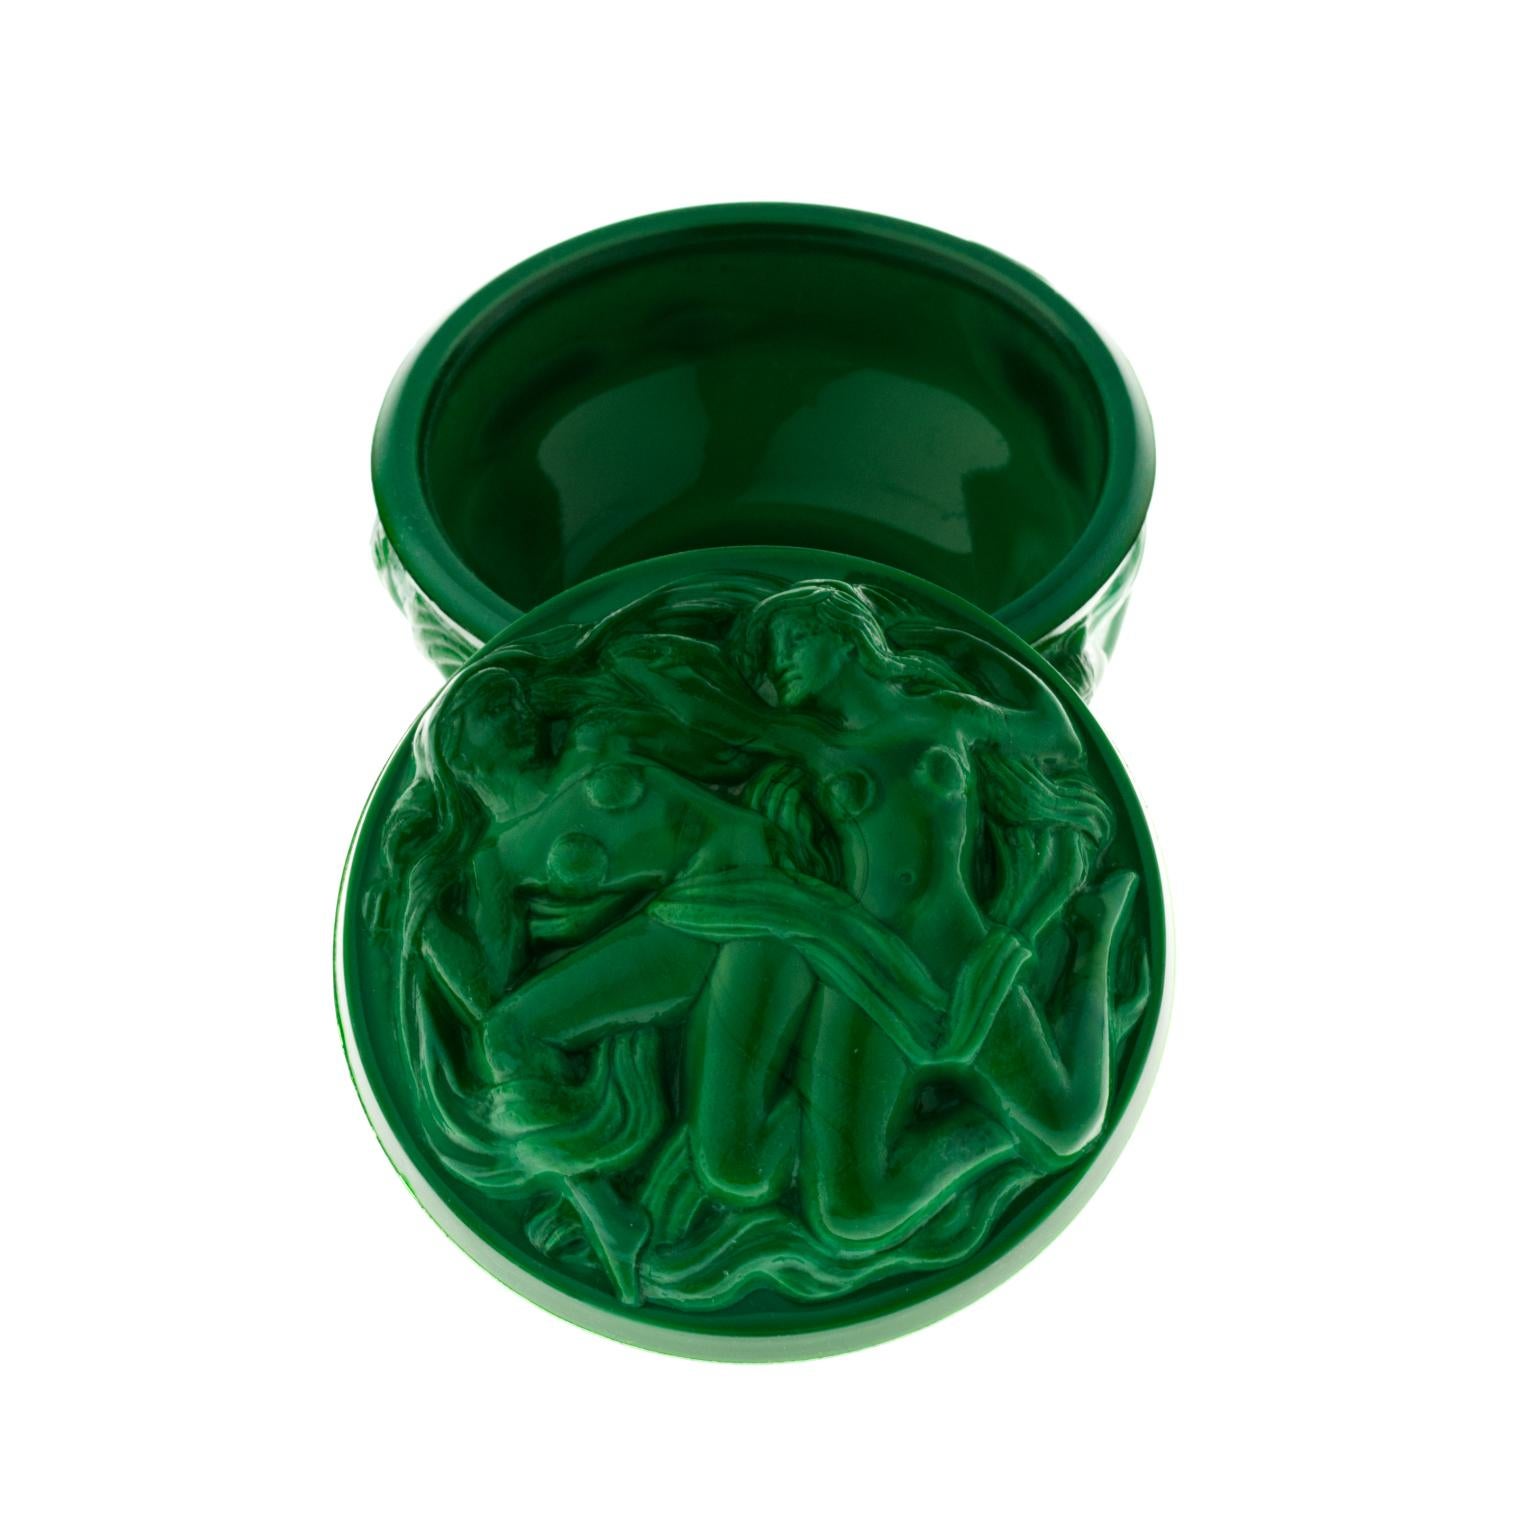 Fantastic example of a I. Heinrich Hoffmann Czech Art Deco malachite glass high relief reclining nude trinket box. It's done in beautiful green Czechoslovakian malachite glass with nudes on the sides and the cover this exquisite jewelry box is a